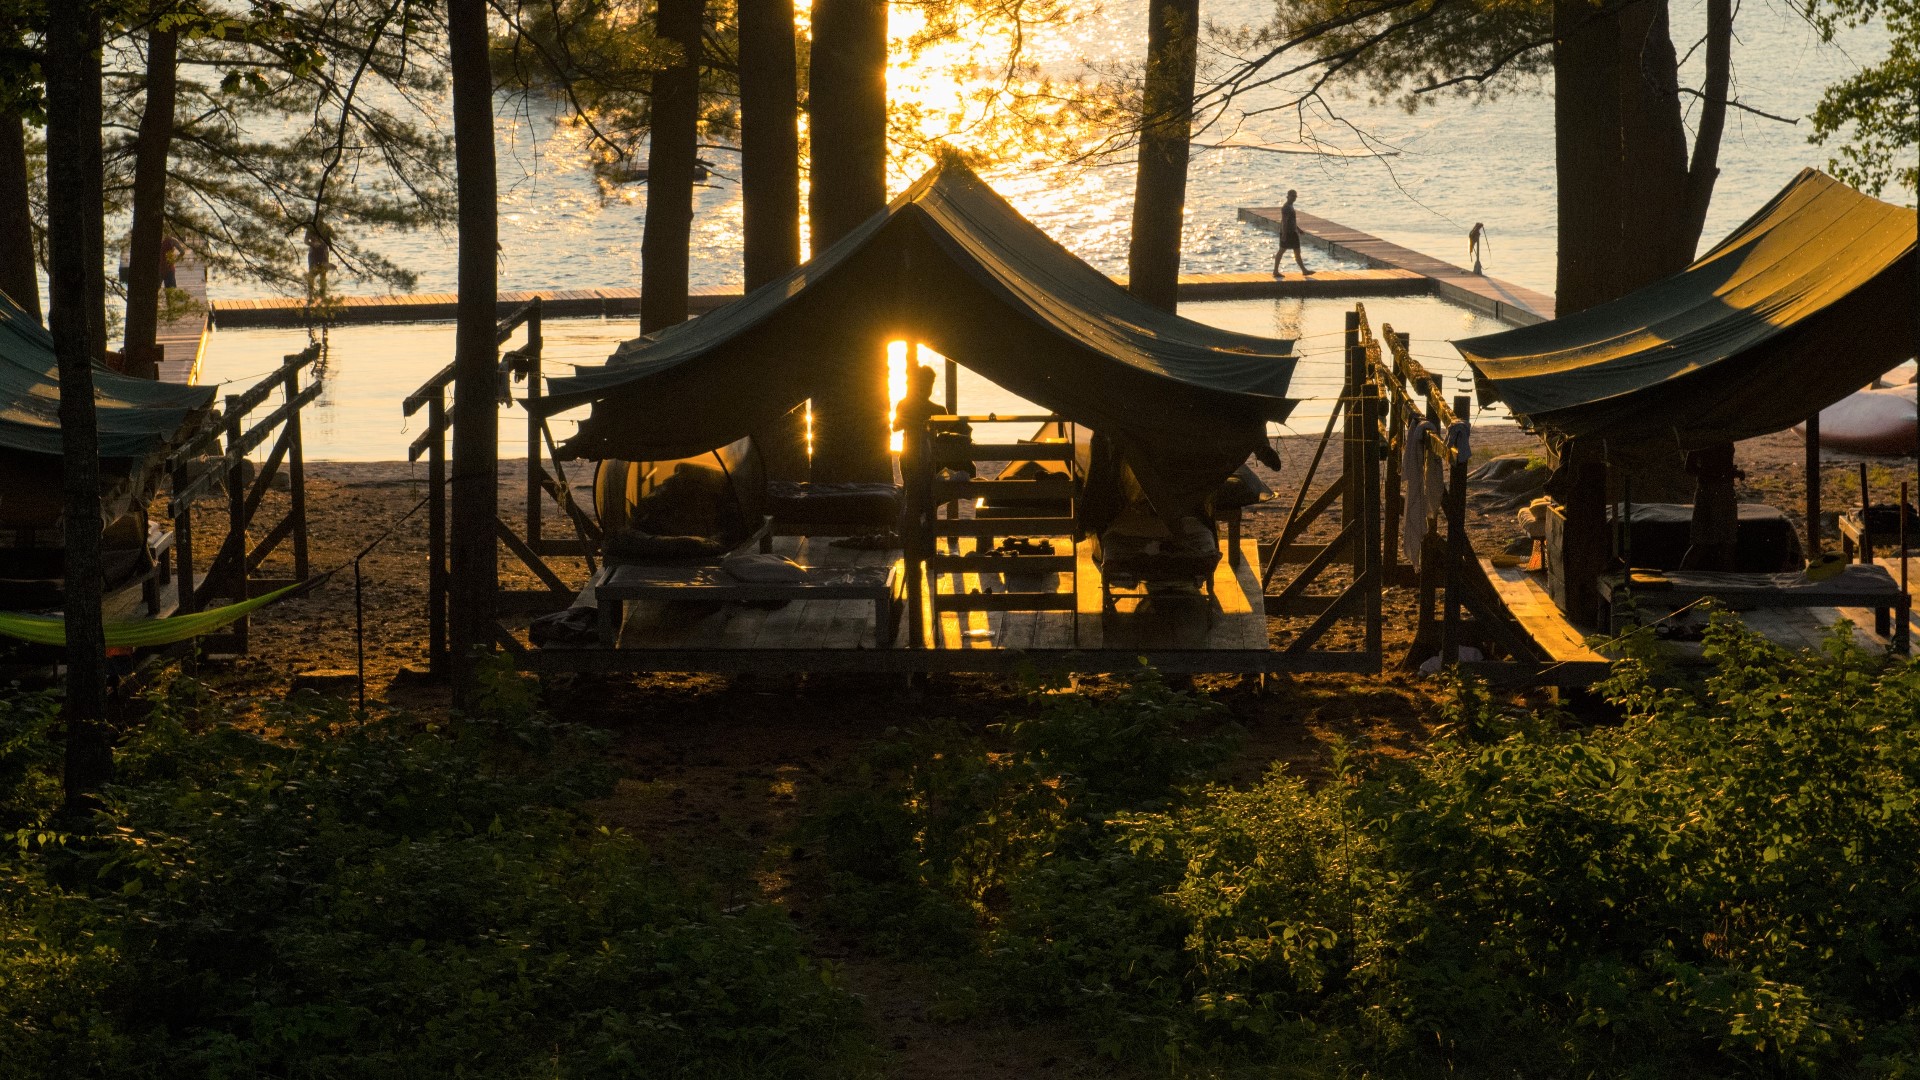 Maine summer camps face uncertainty during coronavirus, COVID-19 pandemic